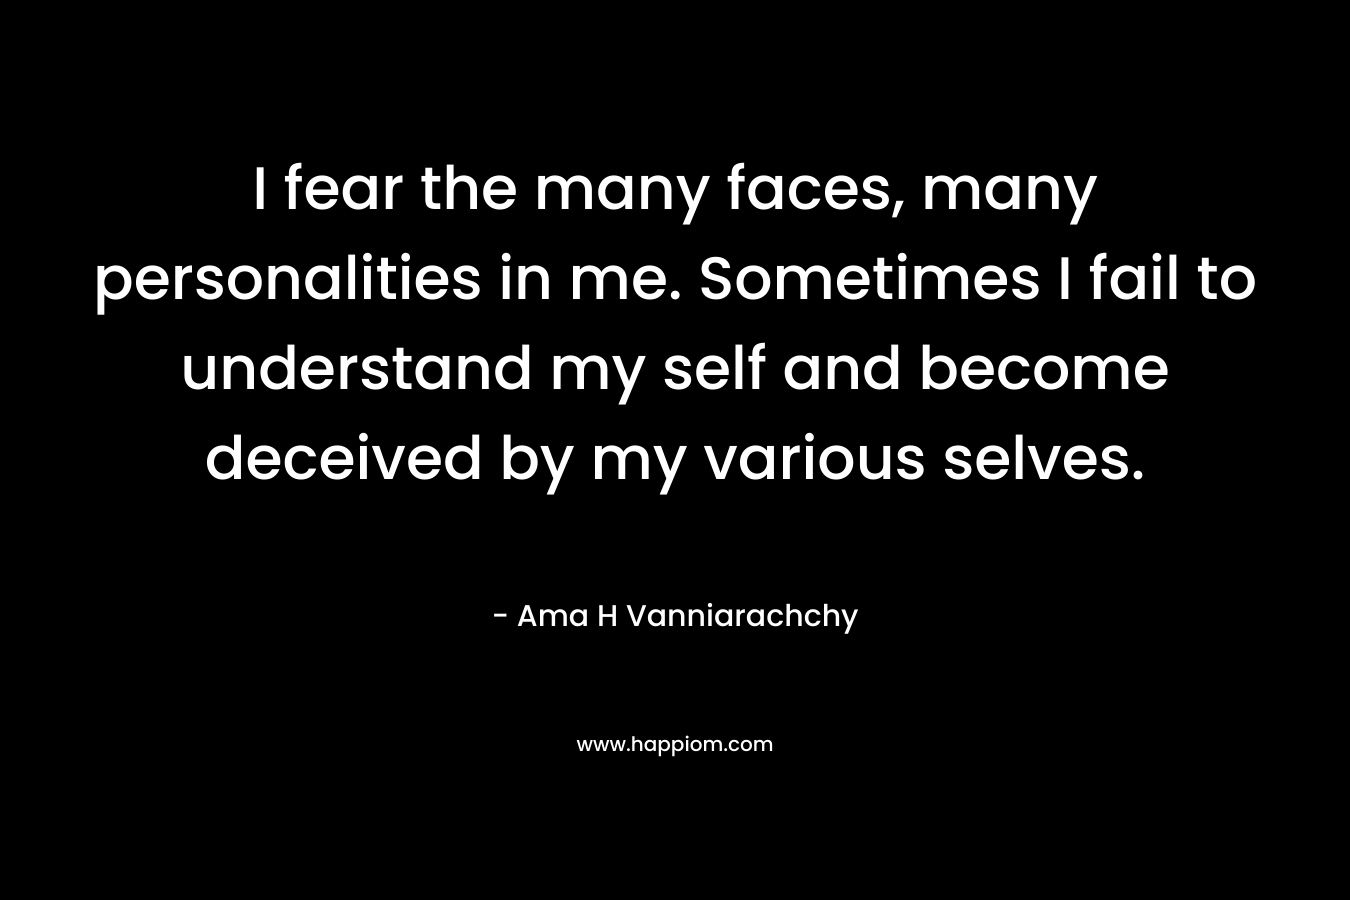 I fear the many faces, many personalities in me. Sometimes I fail to understand my self and become deceived by my various selves. – Ama H Vanniarachchy